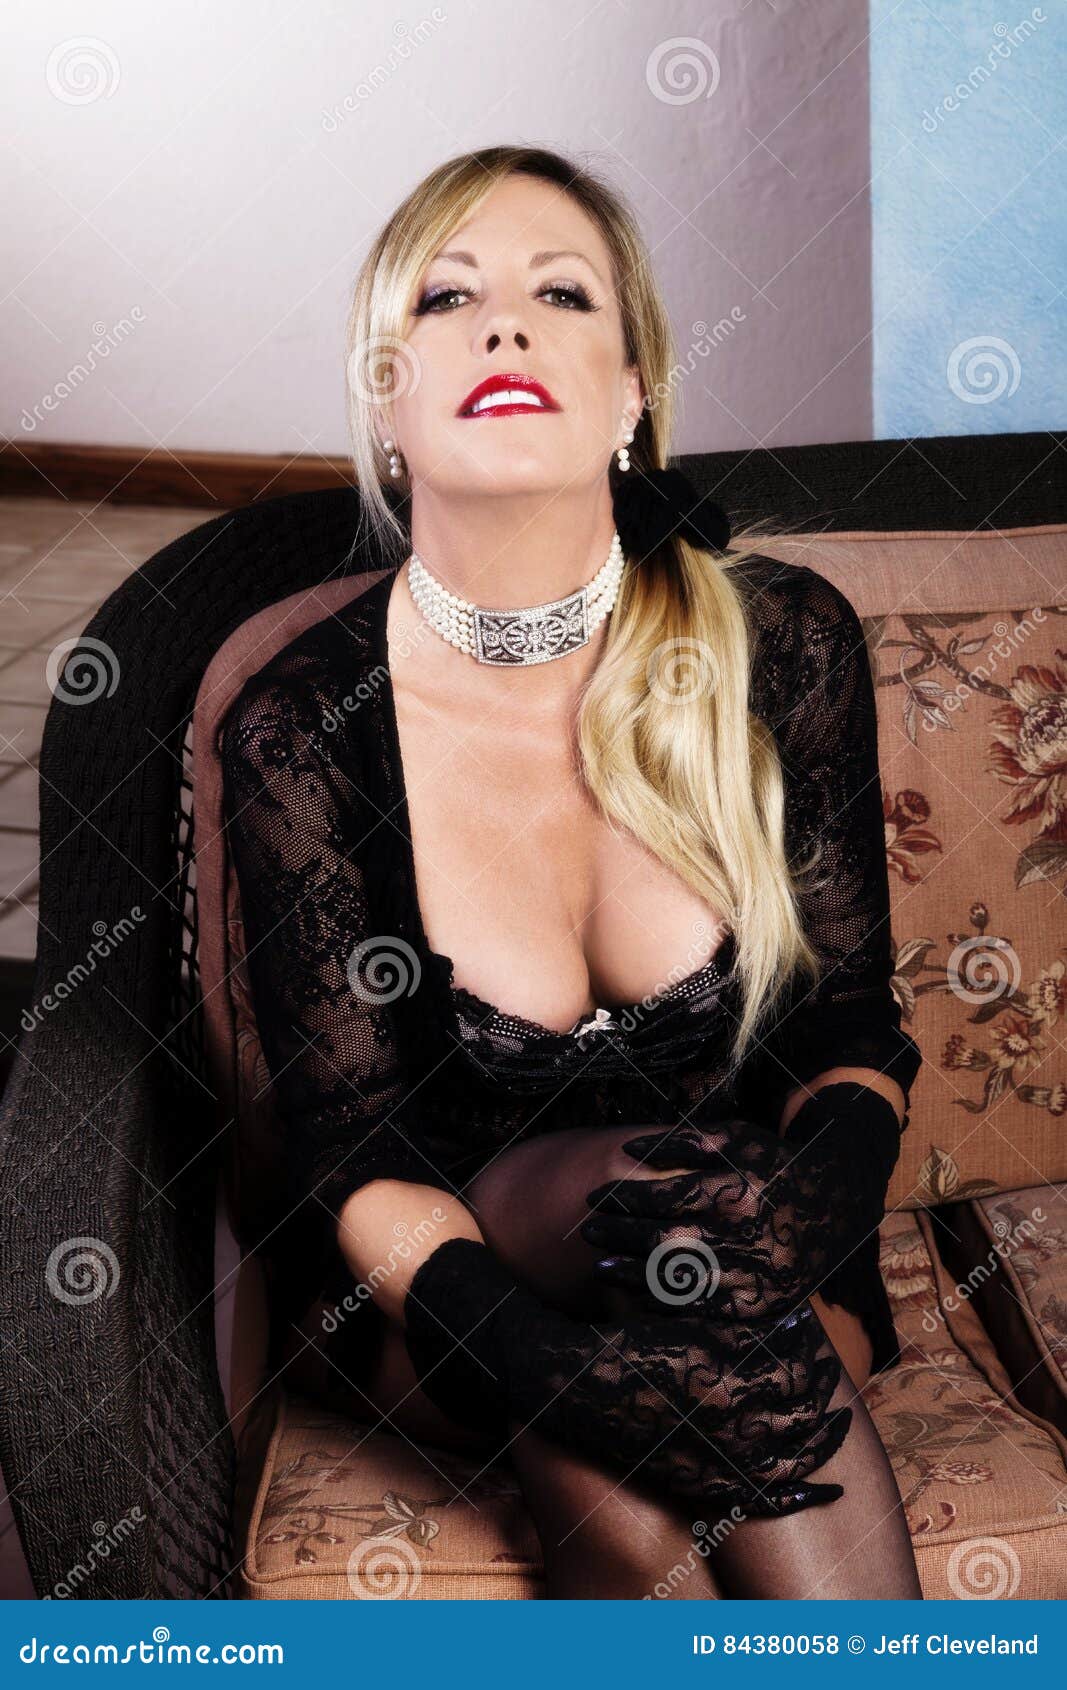 Older Blond Caucasian Woman Sitting in Lace Lingerie Stock Photo